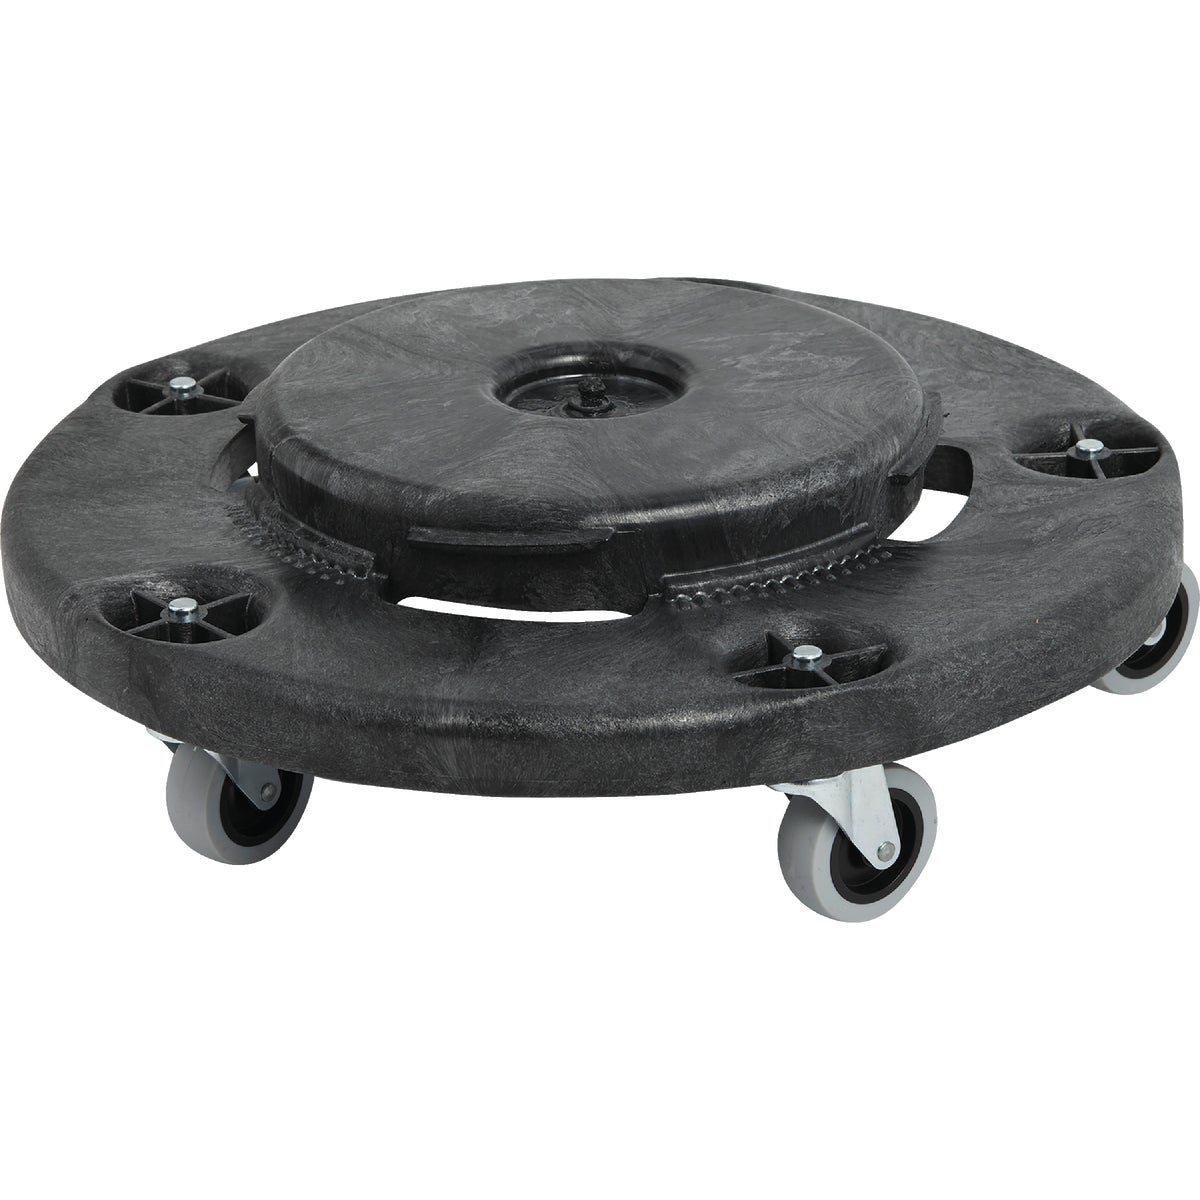 Item 617962, The BRUTE Dolly smoothly and efficiently transports 20, 32, 44, and 55-